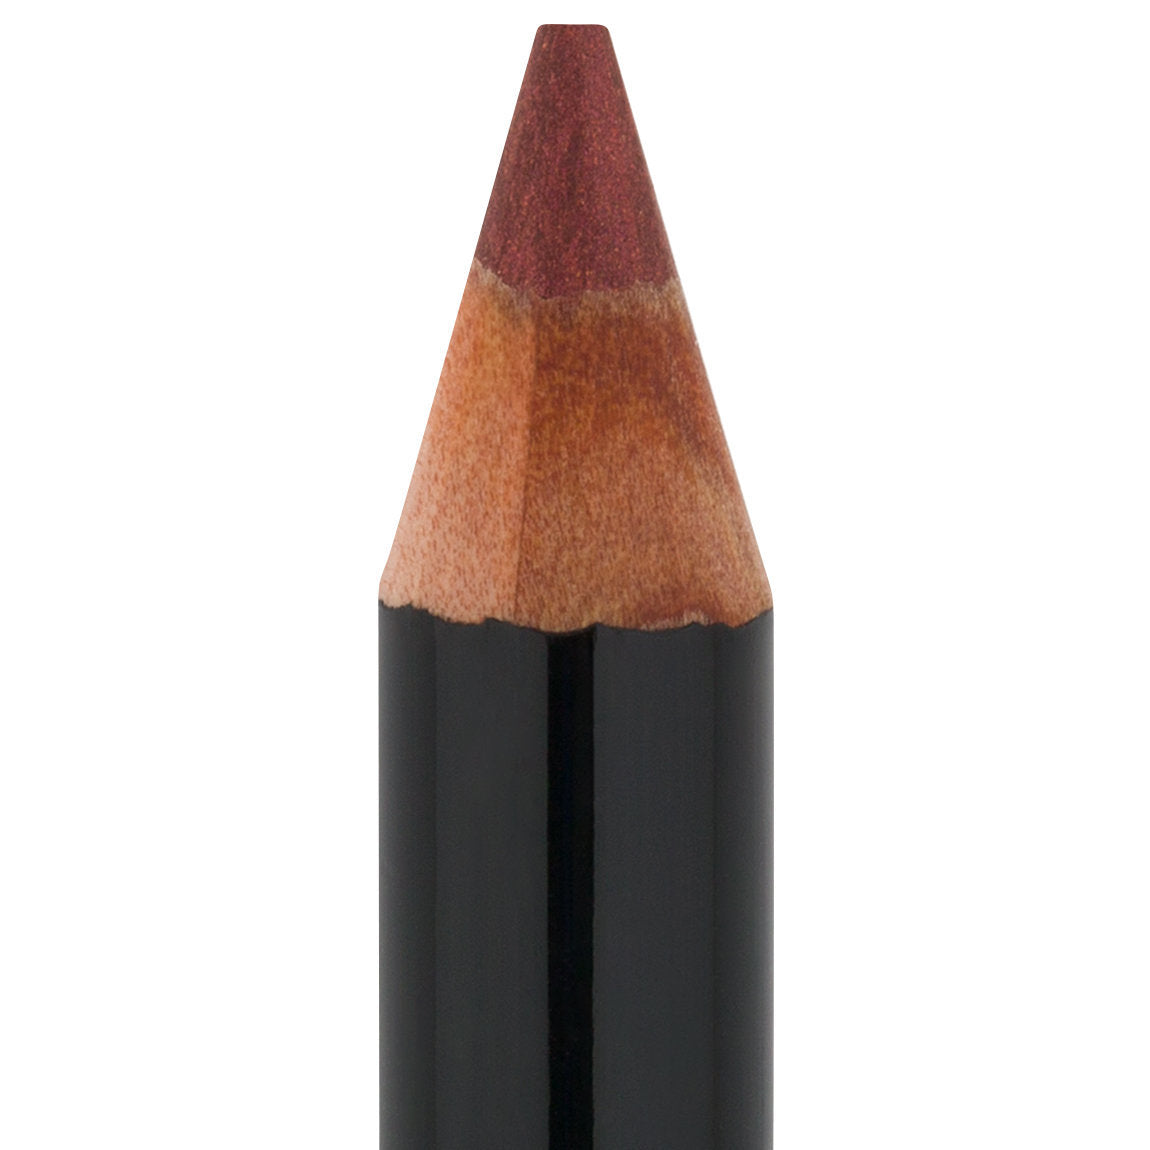 The Essential Eye Kohl Pencil - Copper Flame